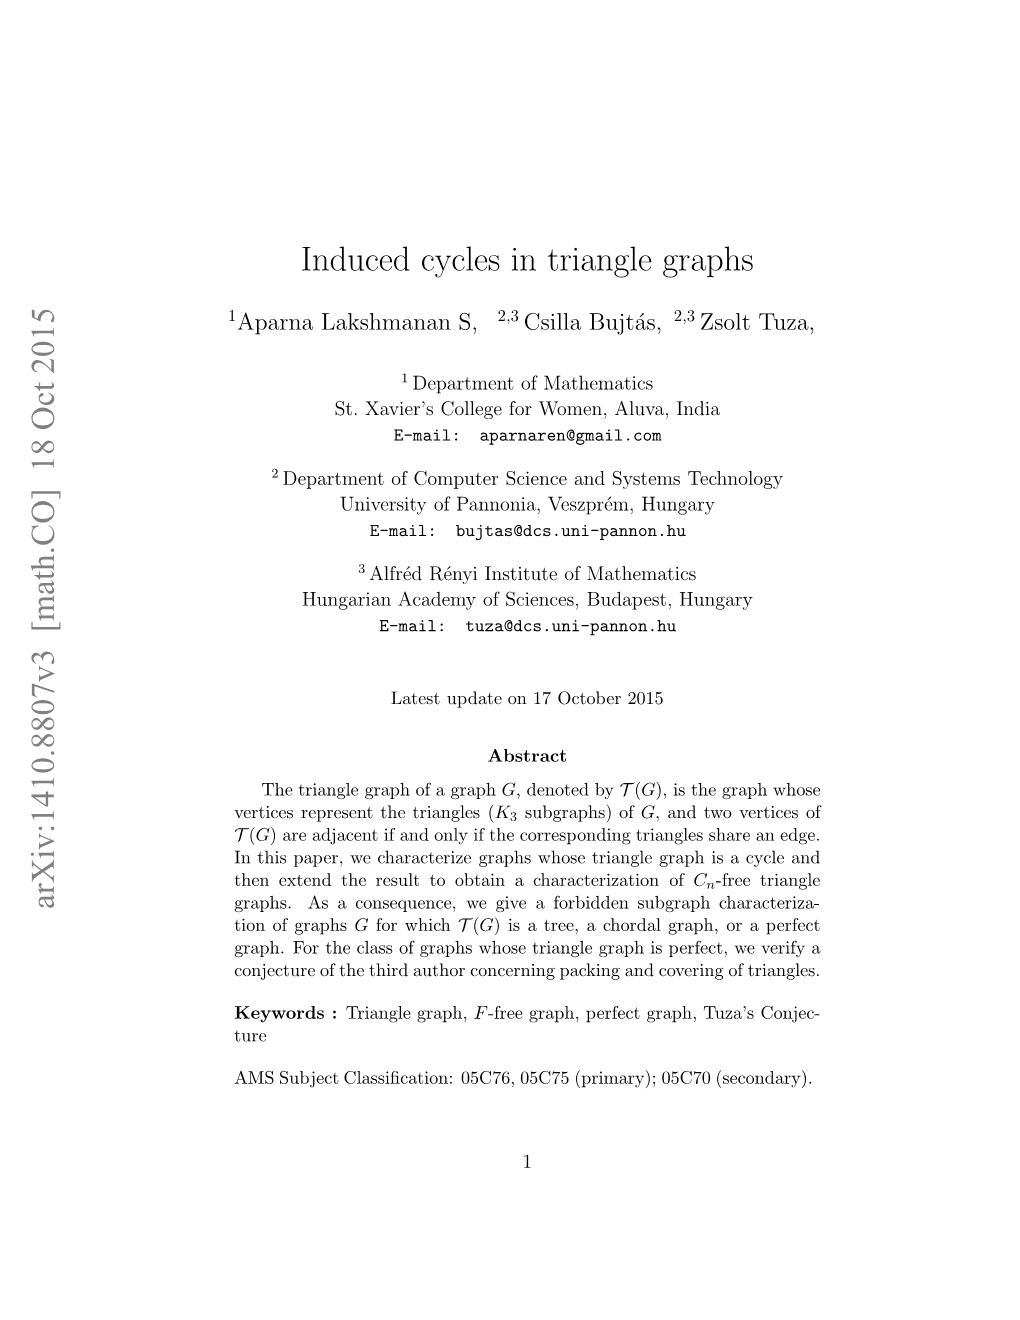 Arxiv:1410.8807V3 [Math.CO] 18 Oct 2015 Induced Cycles in Triangle